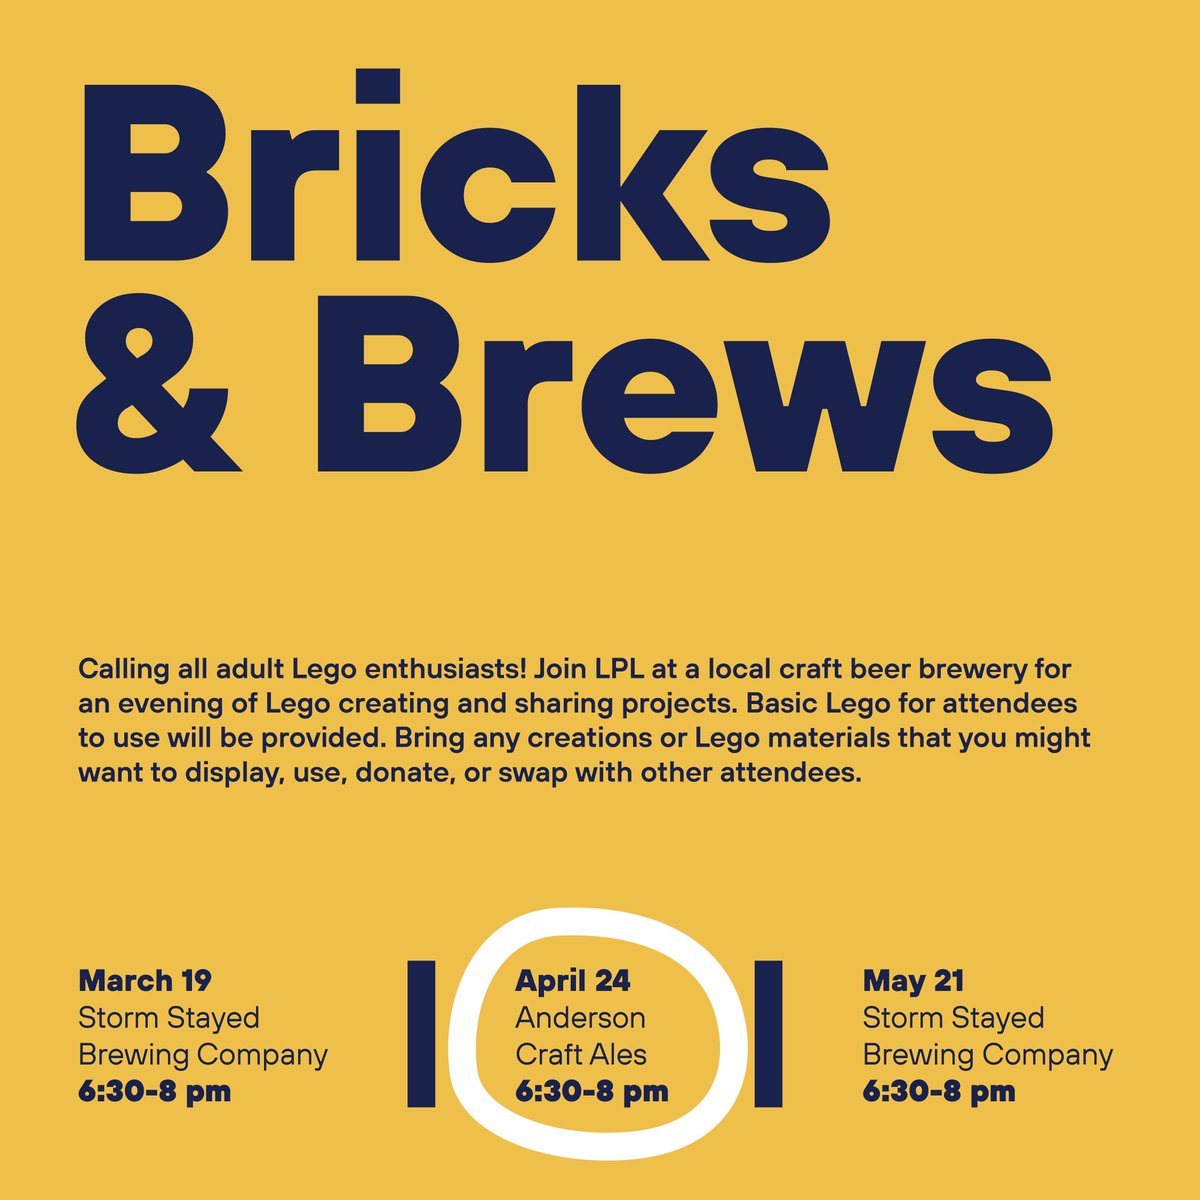 ⚠️ Calling all adult Lego enthusiasts! ⚠️ Join LPL and @AndersonCAles on Wednesday, April 24 from 6:30-8 pm for an evening of Bricks & Brews!